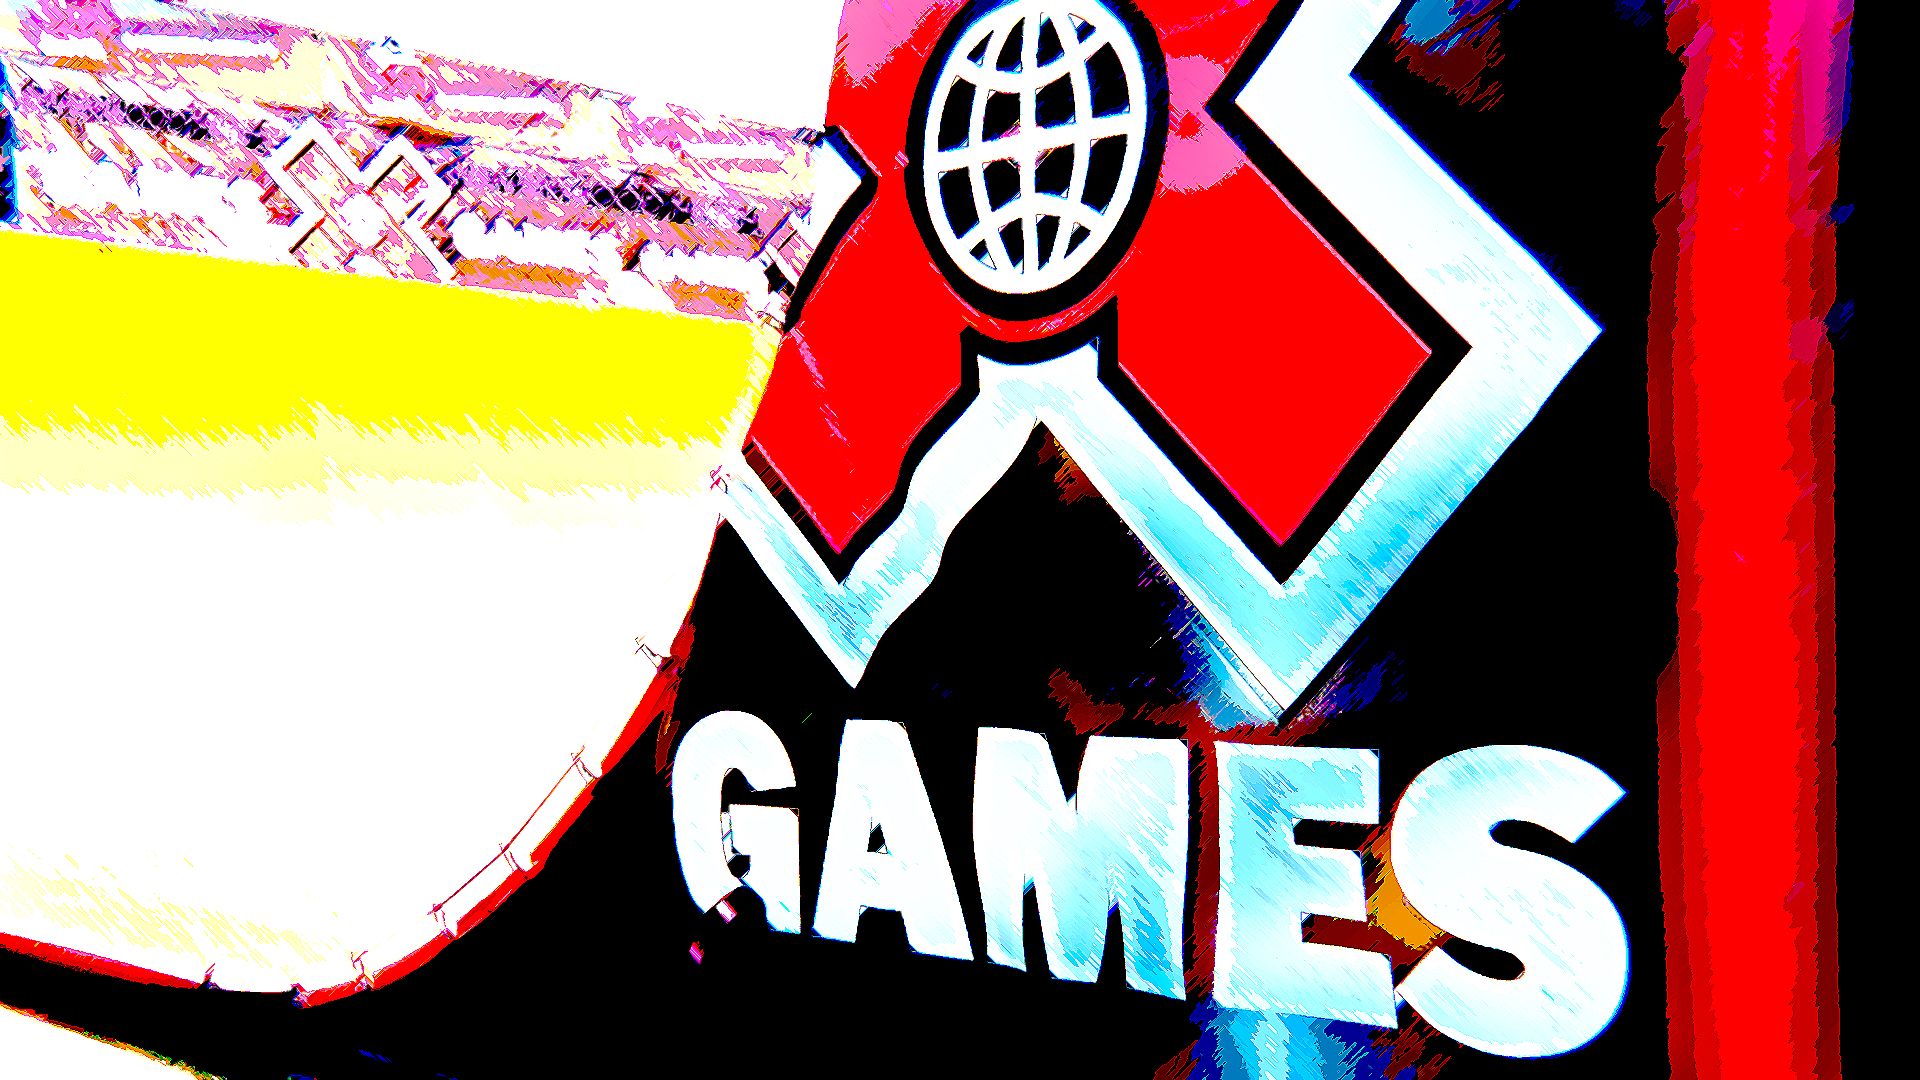 X games. Xgame. X-game НН. Wallpaper Posted by Foster Robert. X games сайт